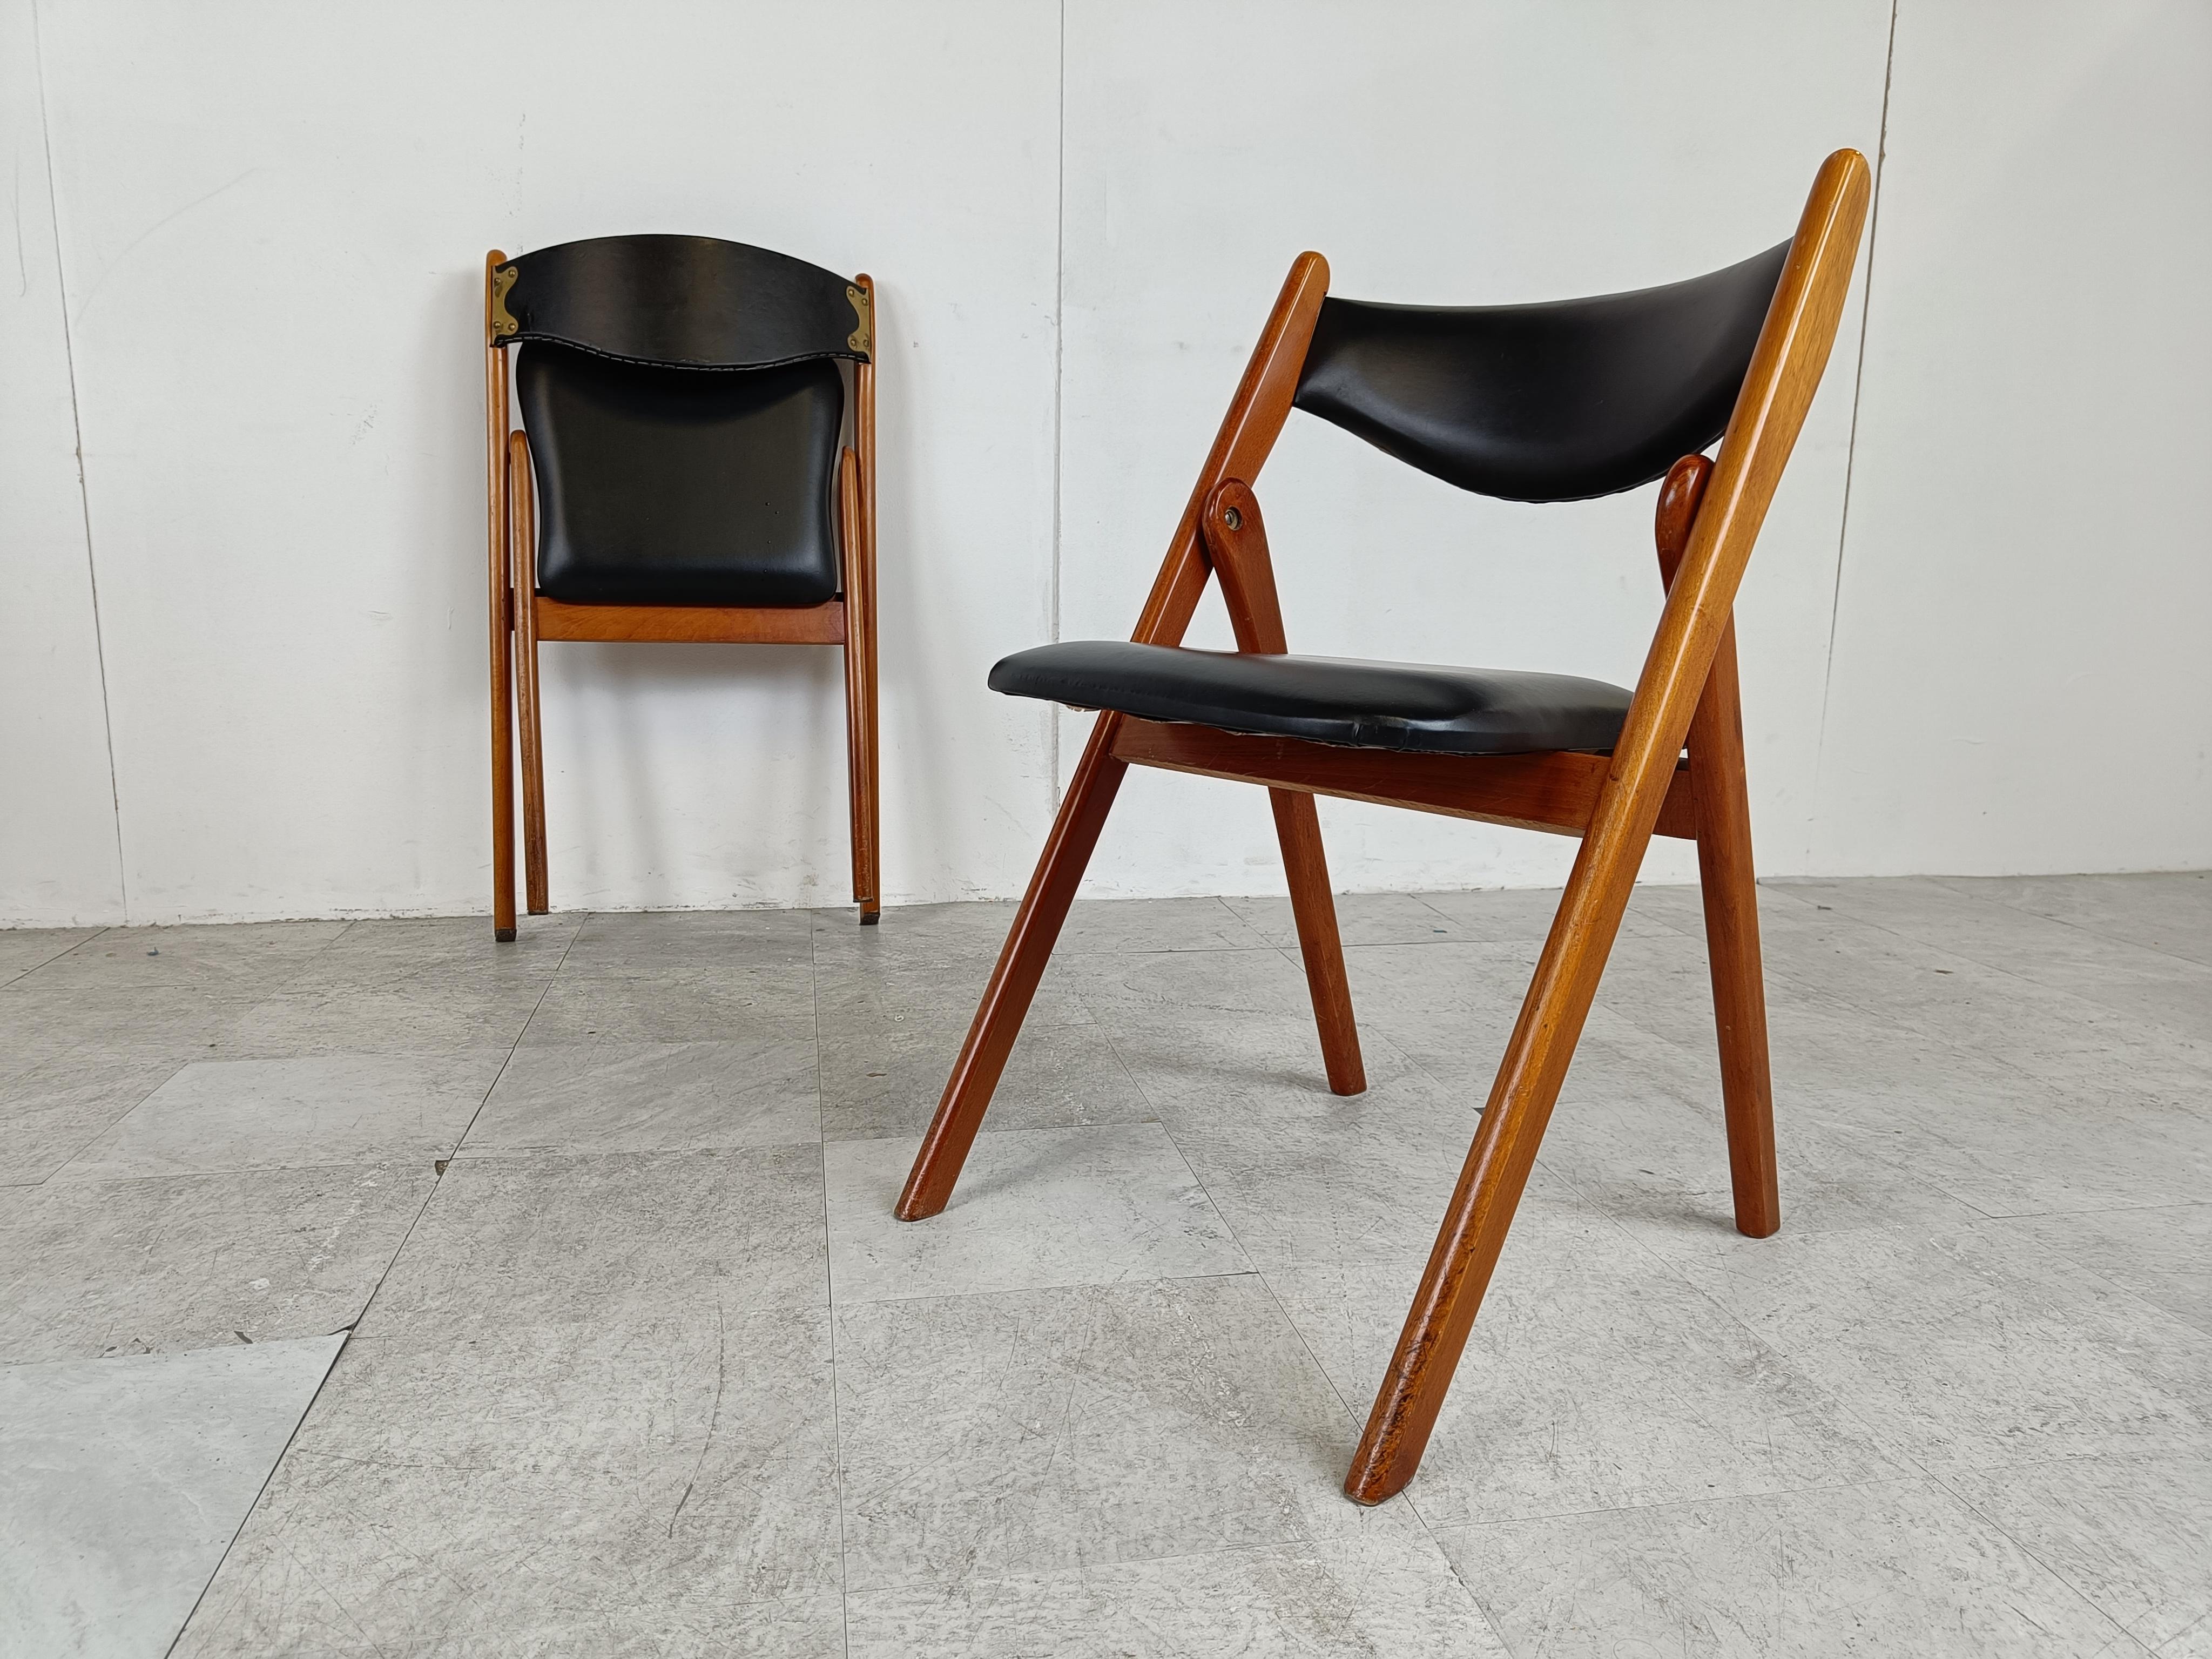 Set of 4 Mid-Century Modern folding chairs model Coronet by Norquist.

Designed and made in the 1960s these charming folding chairs are very well made.

Teak frames with black skai upholstery

Made in USA - 1960s 

Dimensions:
Height: